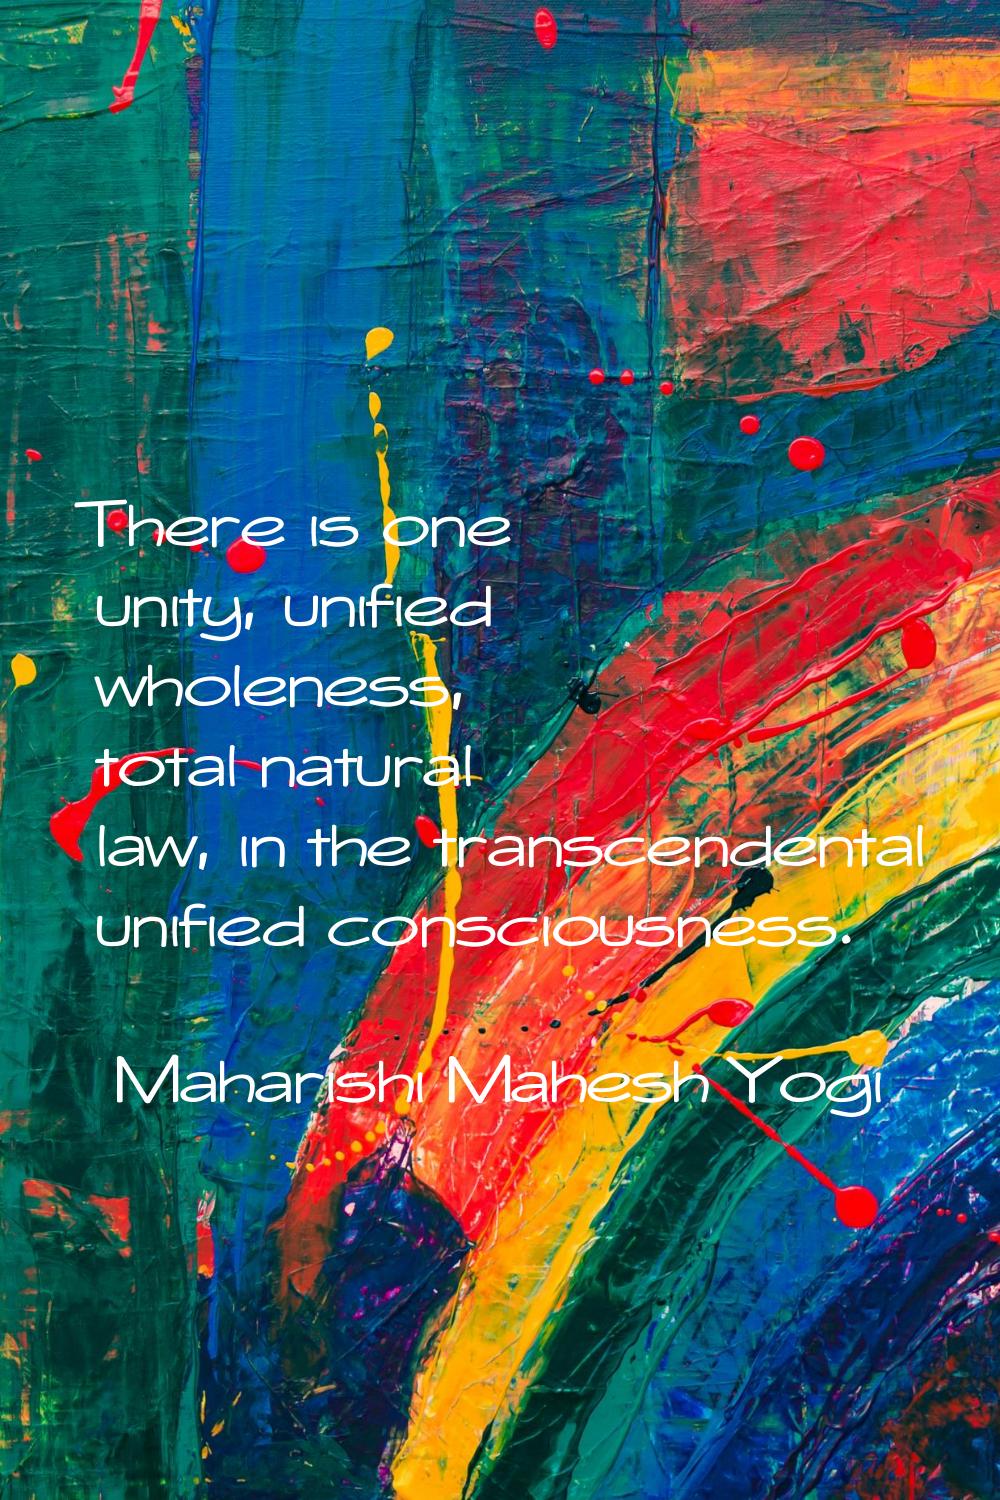 There is one unity, unified wholeness, total natural law, in the transcendental unified consciousne